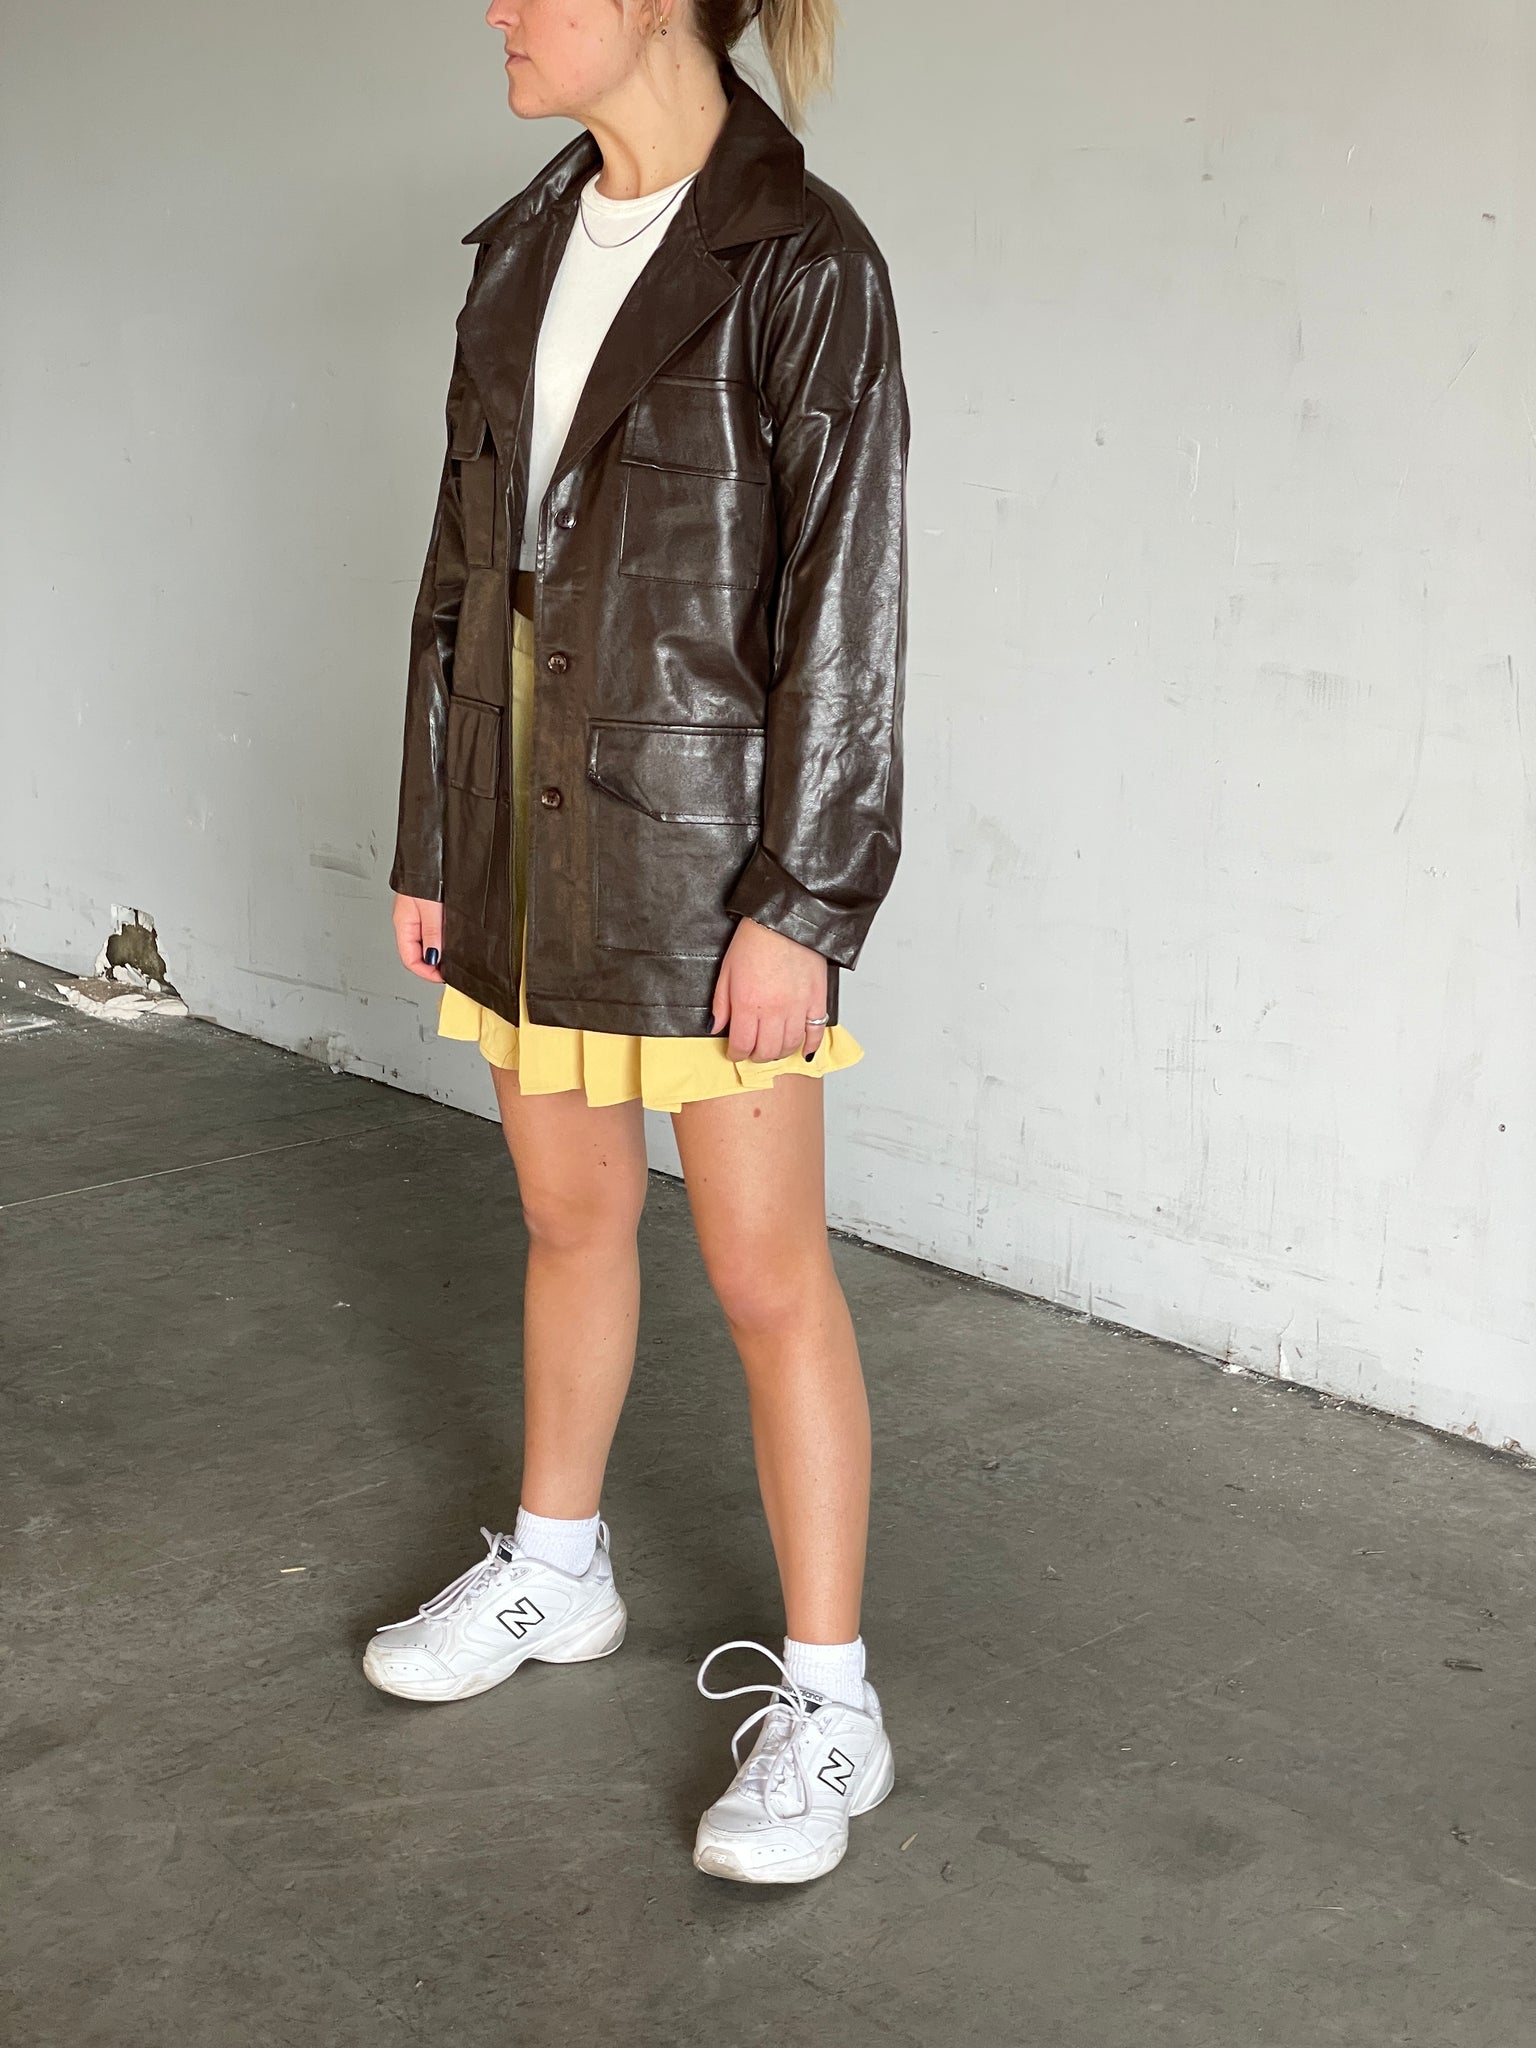 The Espresso Leather Jacket